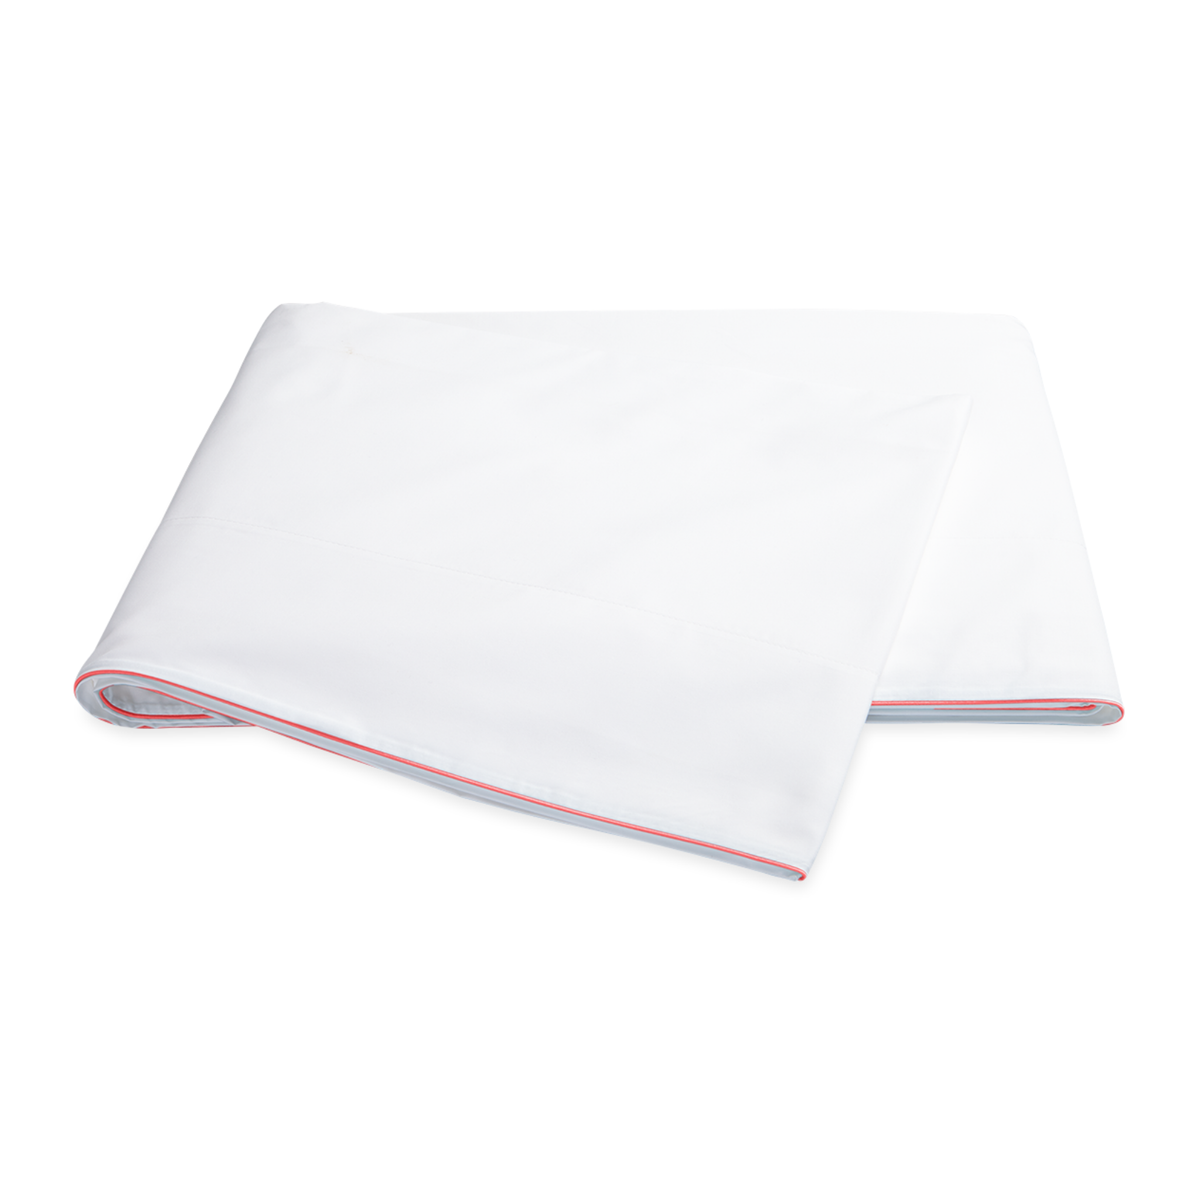 Folded Flat Sheet of Matouk Bryant Bedding in Coral Color